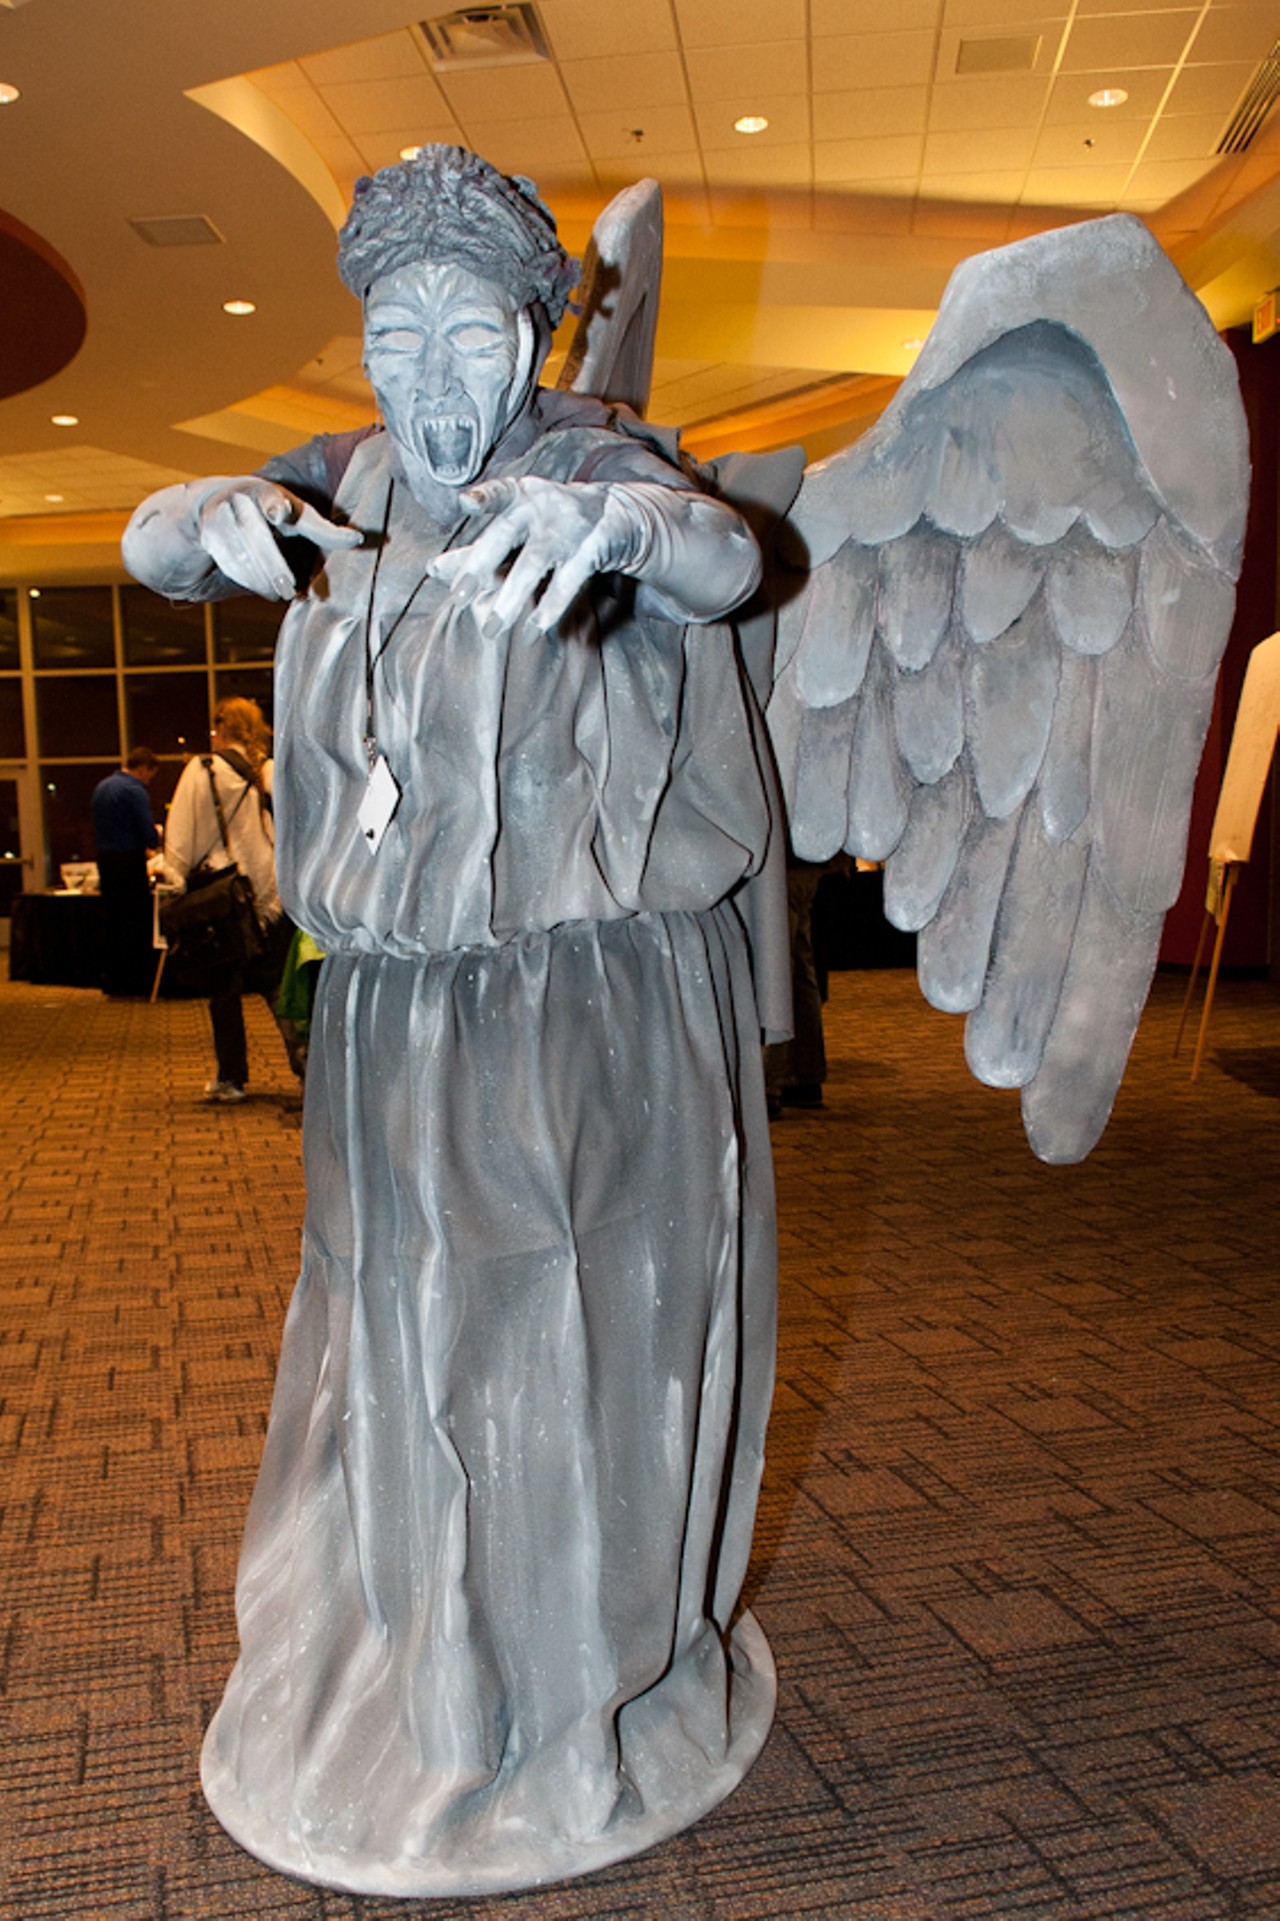 A weeping angel from the BBC's Doctor Who was sighted in Collinsville Friday night.